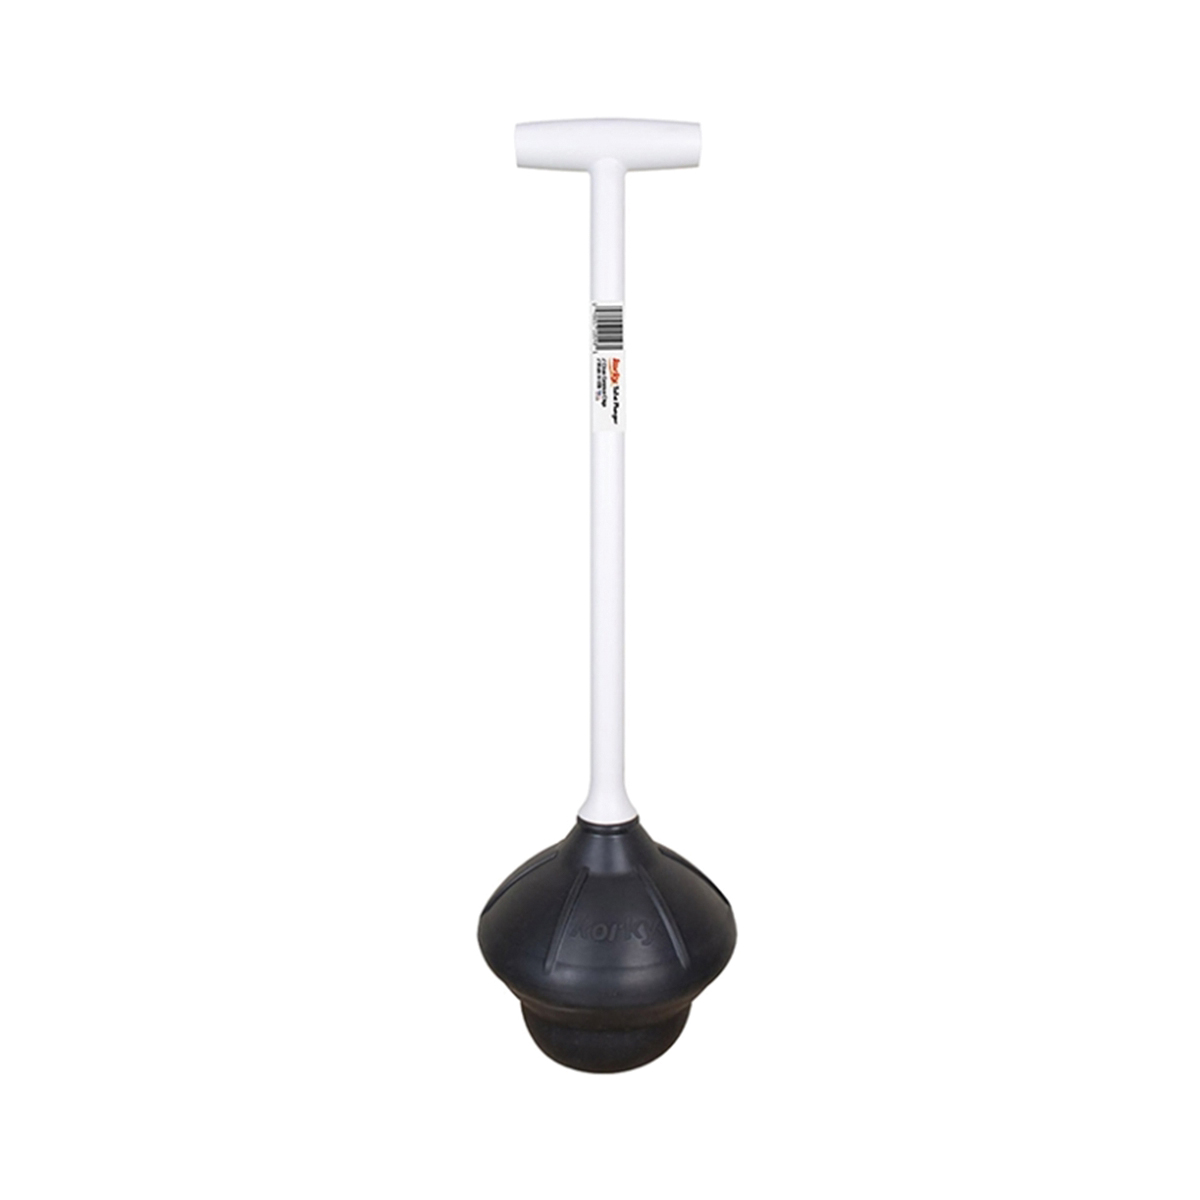 92-8A Toilet Plunger, 6 in Cup, T-Handle Handle